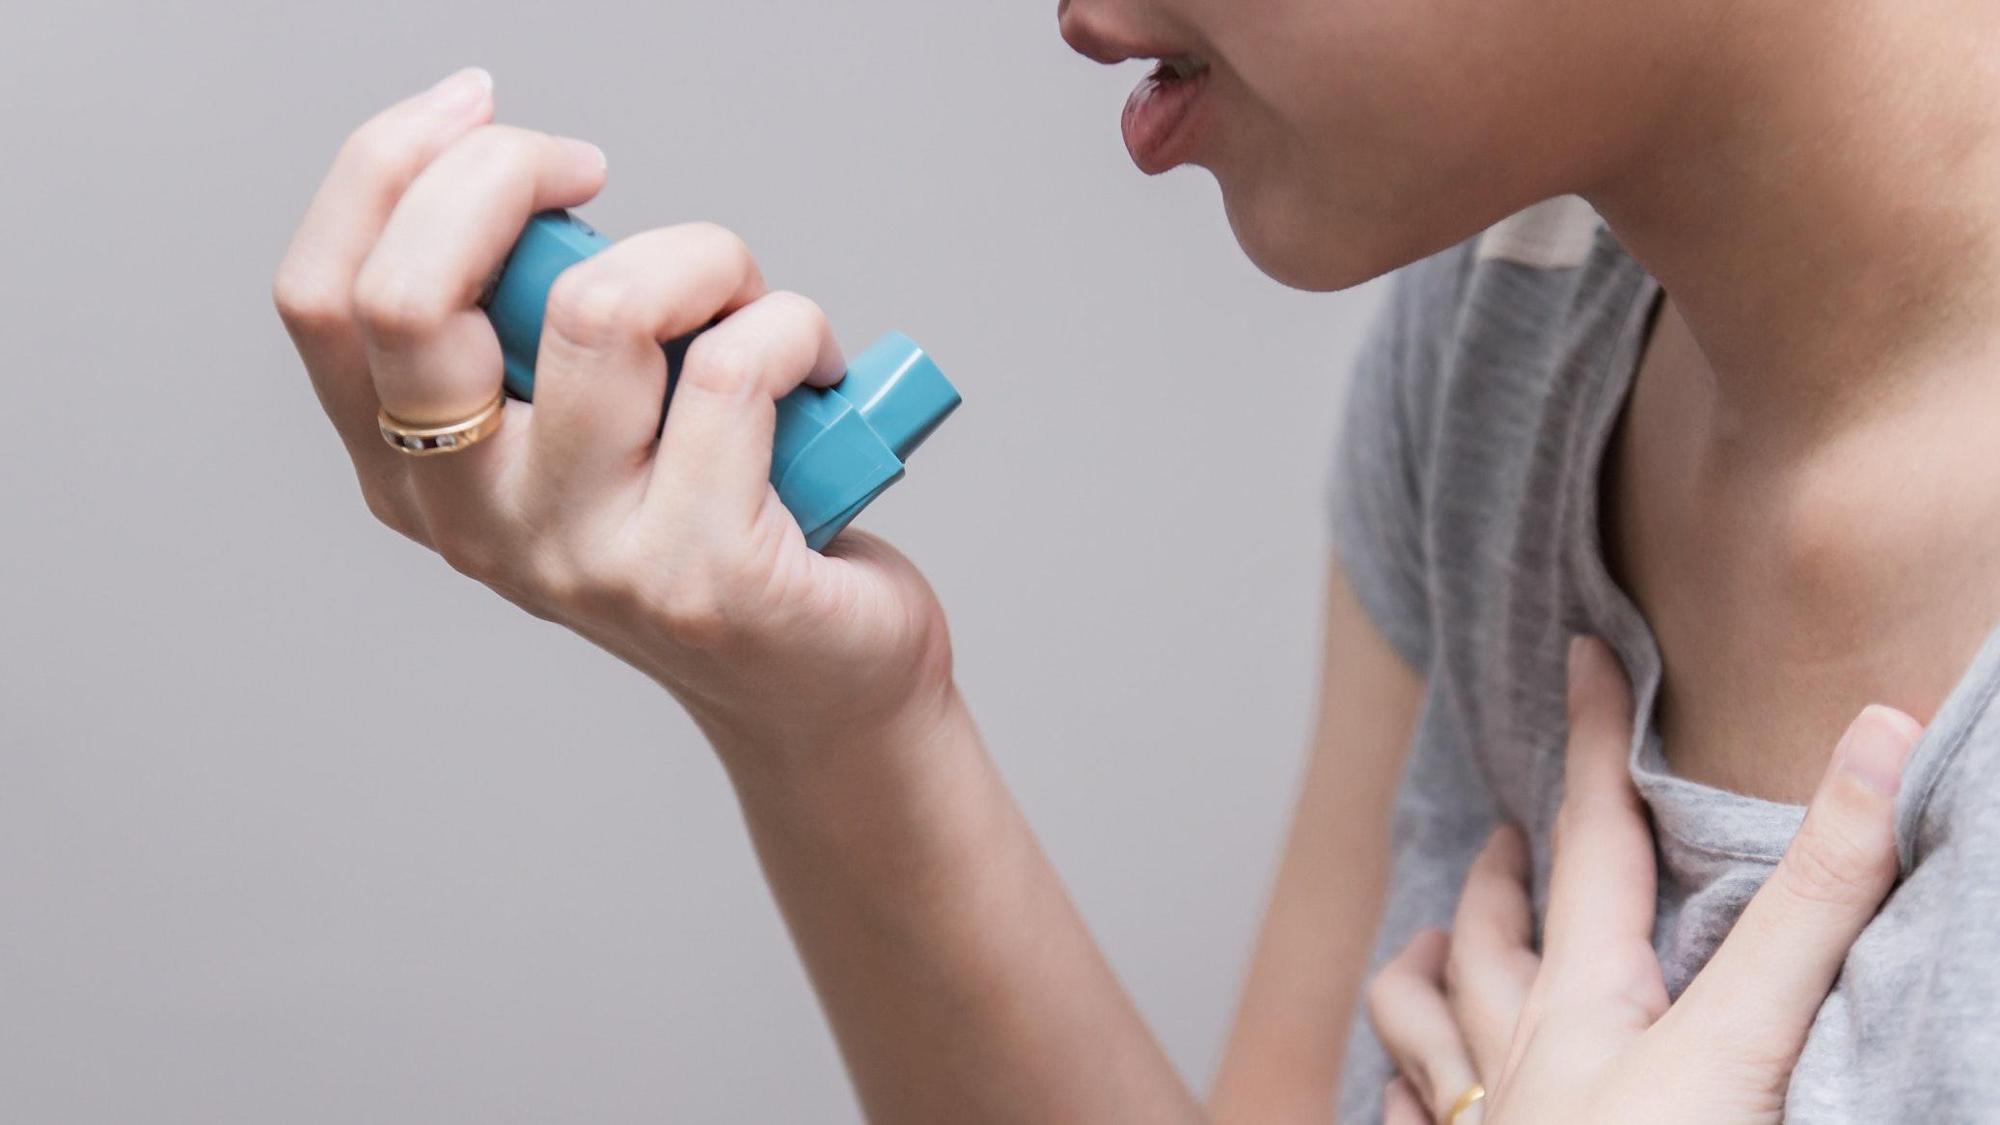 What to do if someone youâre with is having an asthma attack